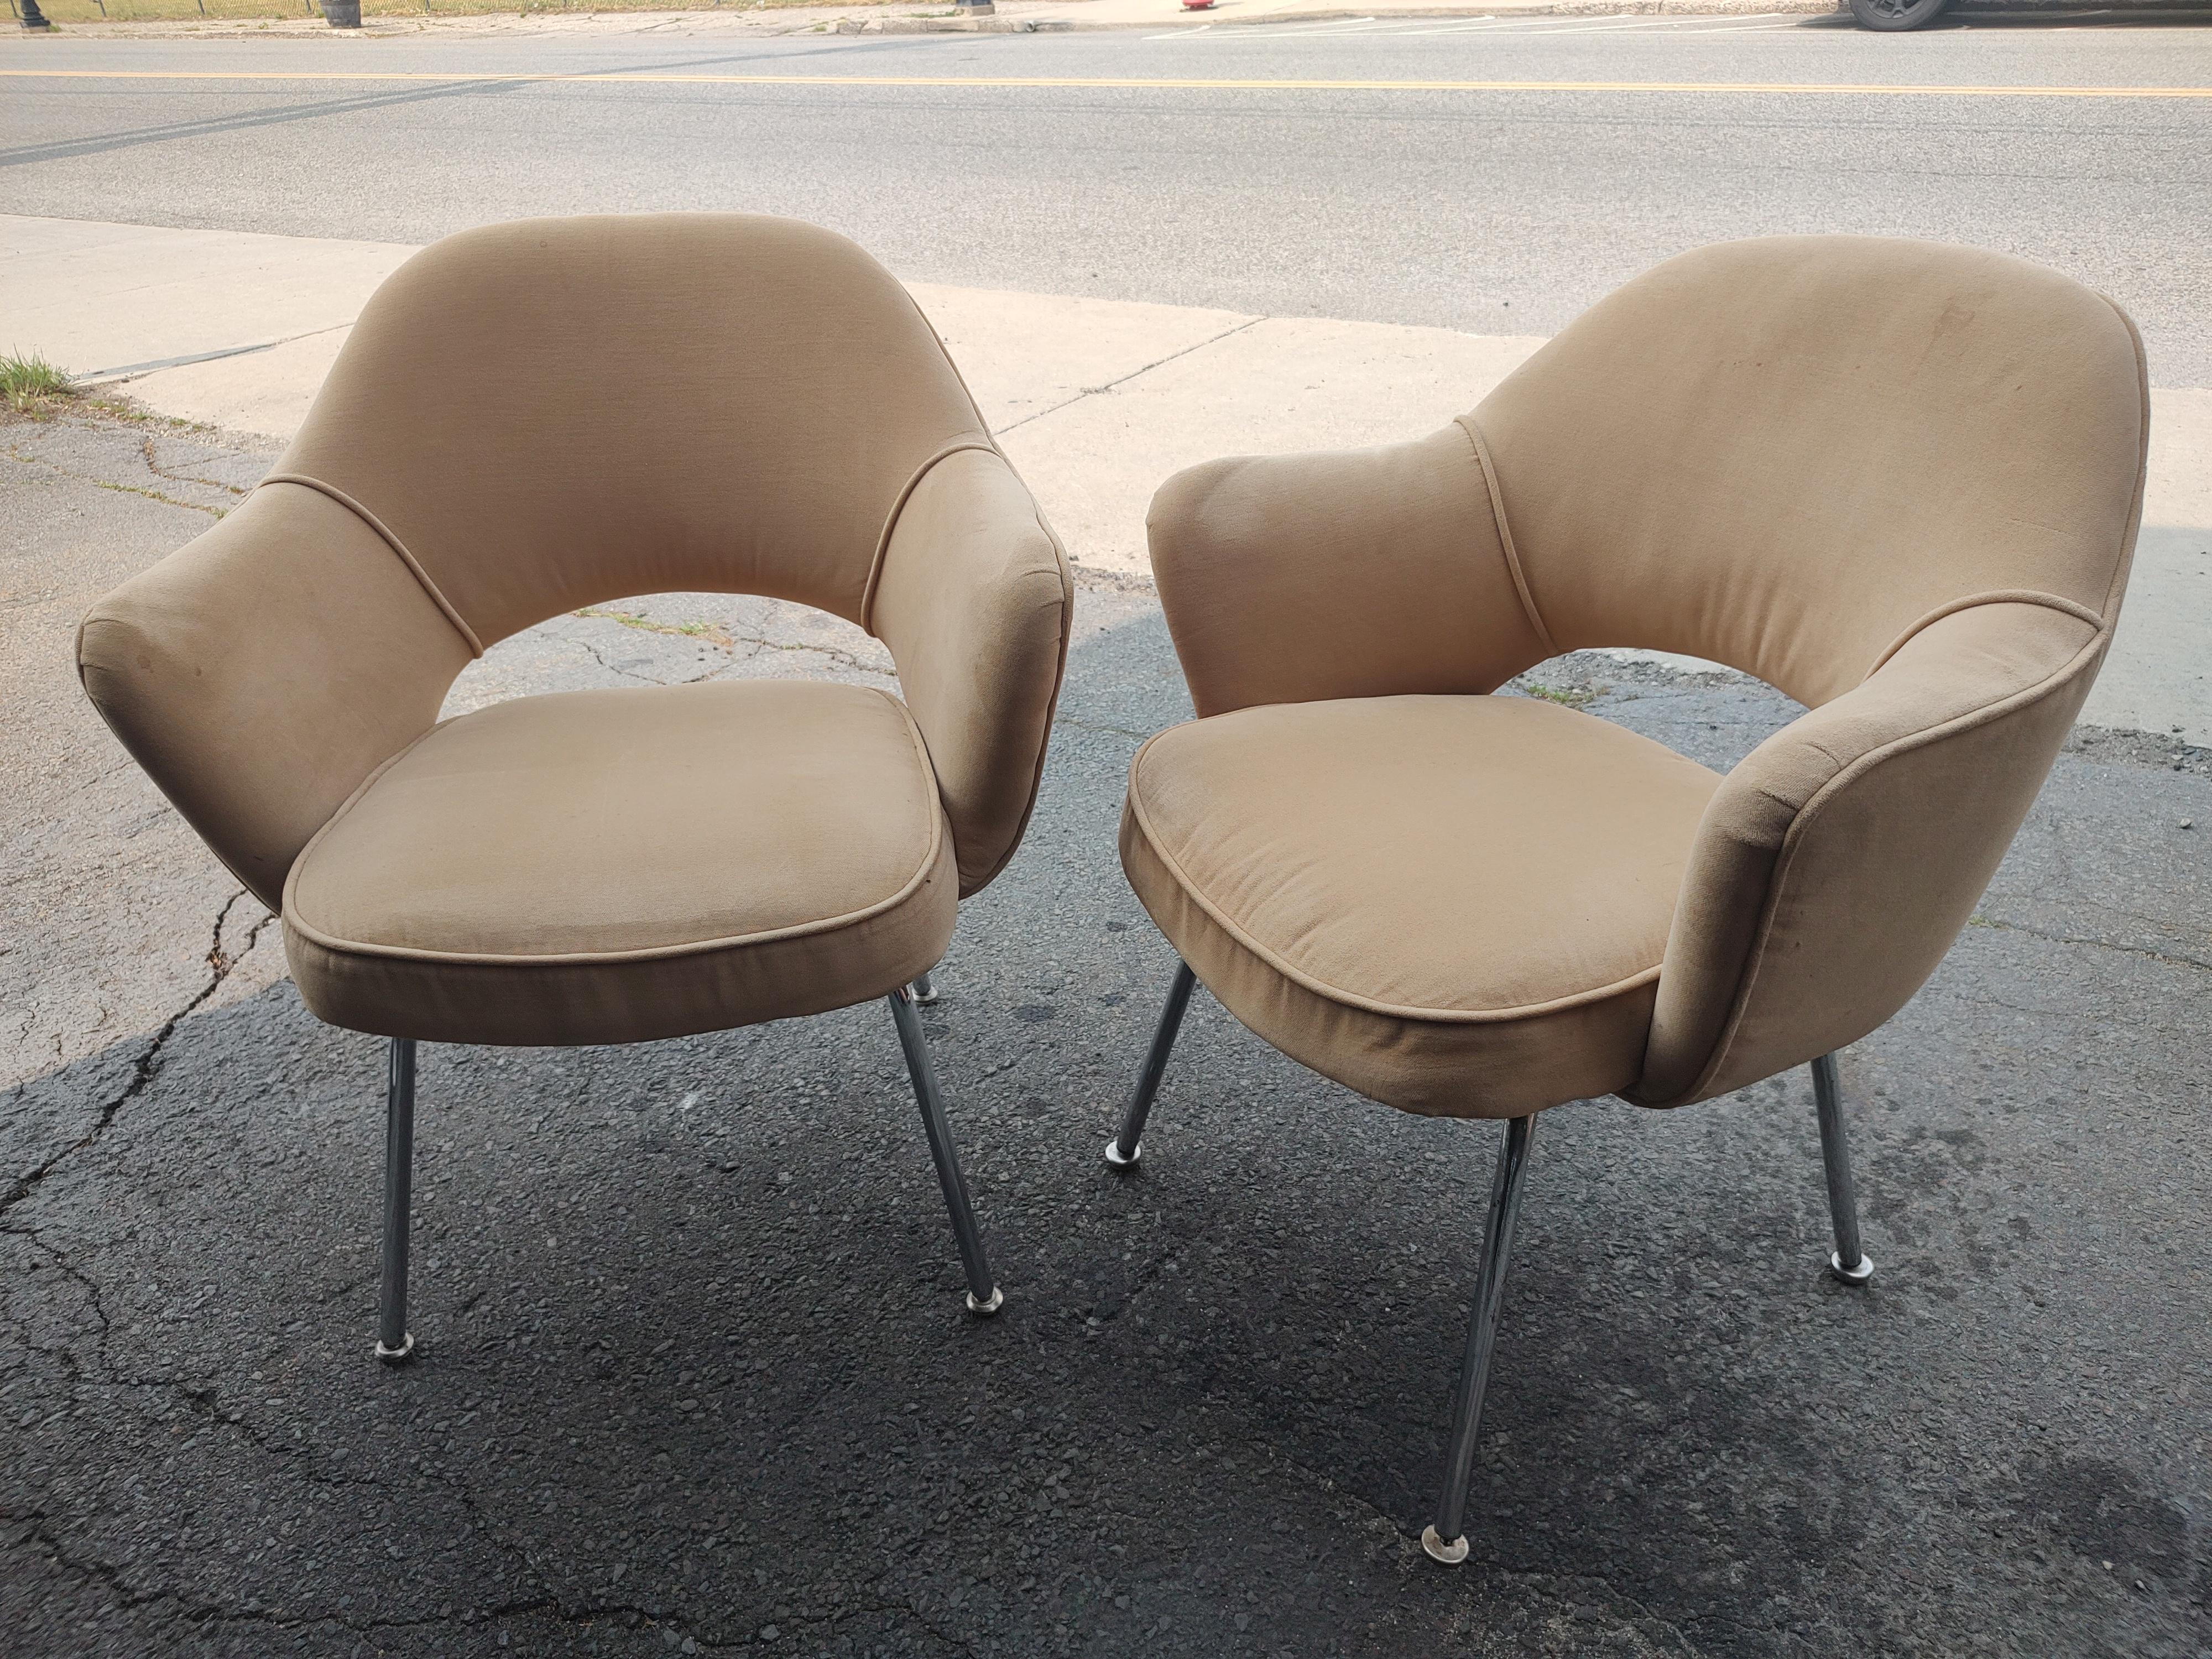 Pair of Mid-Century Modern Executive Armchairs by Eero Saarinen for Knoll, C1965 For Sale 7